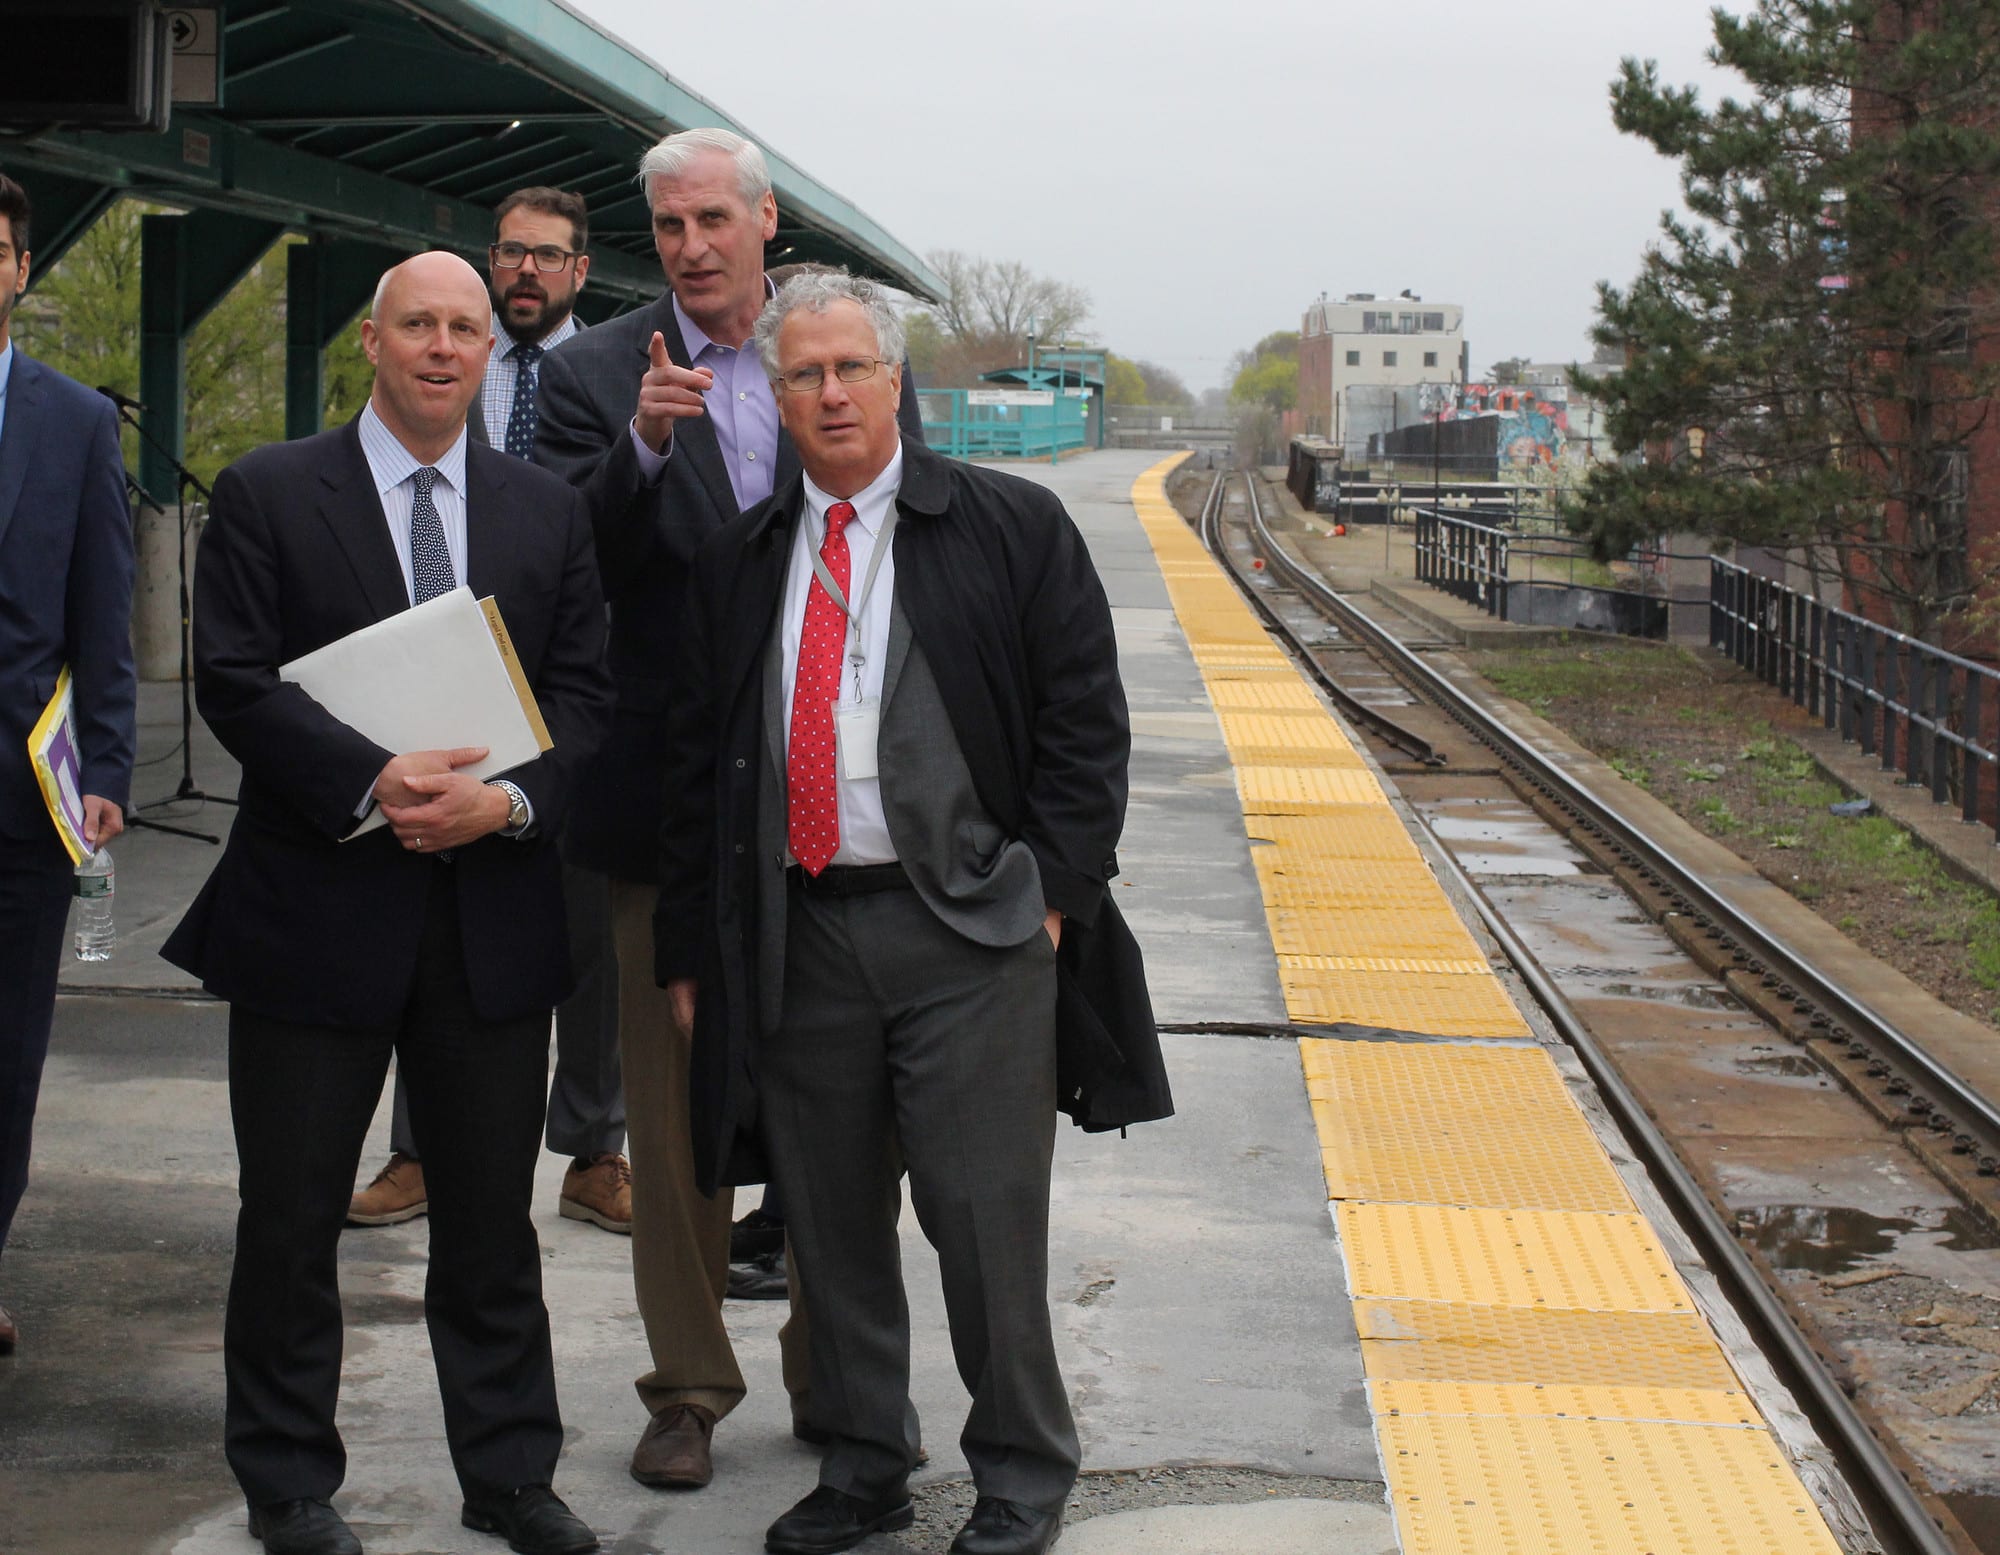 Lynn, Ma. 4-26-19. Joe Mulligan and Mayor Thomas McGee giving Secretary of the Executive Office of Housing and Economic Development Mike Kennealy a tour of Lynn that included the train platform.